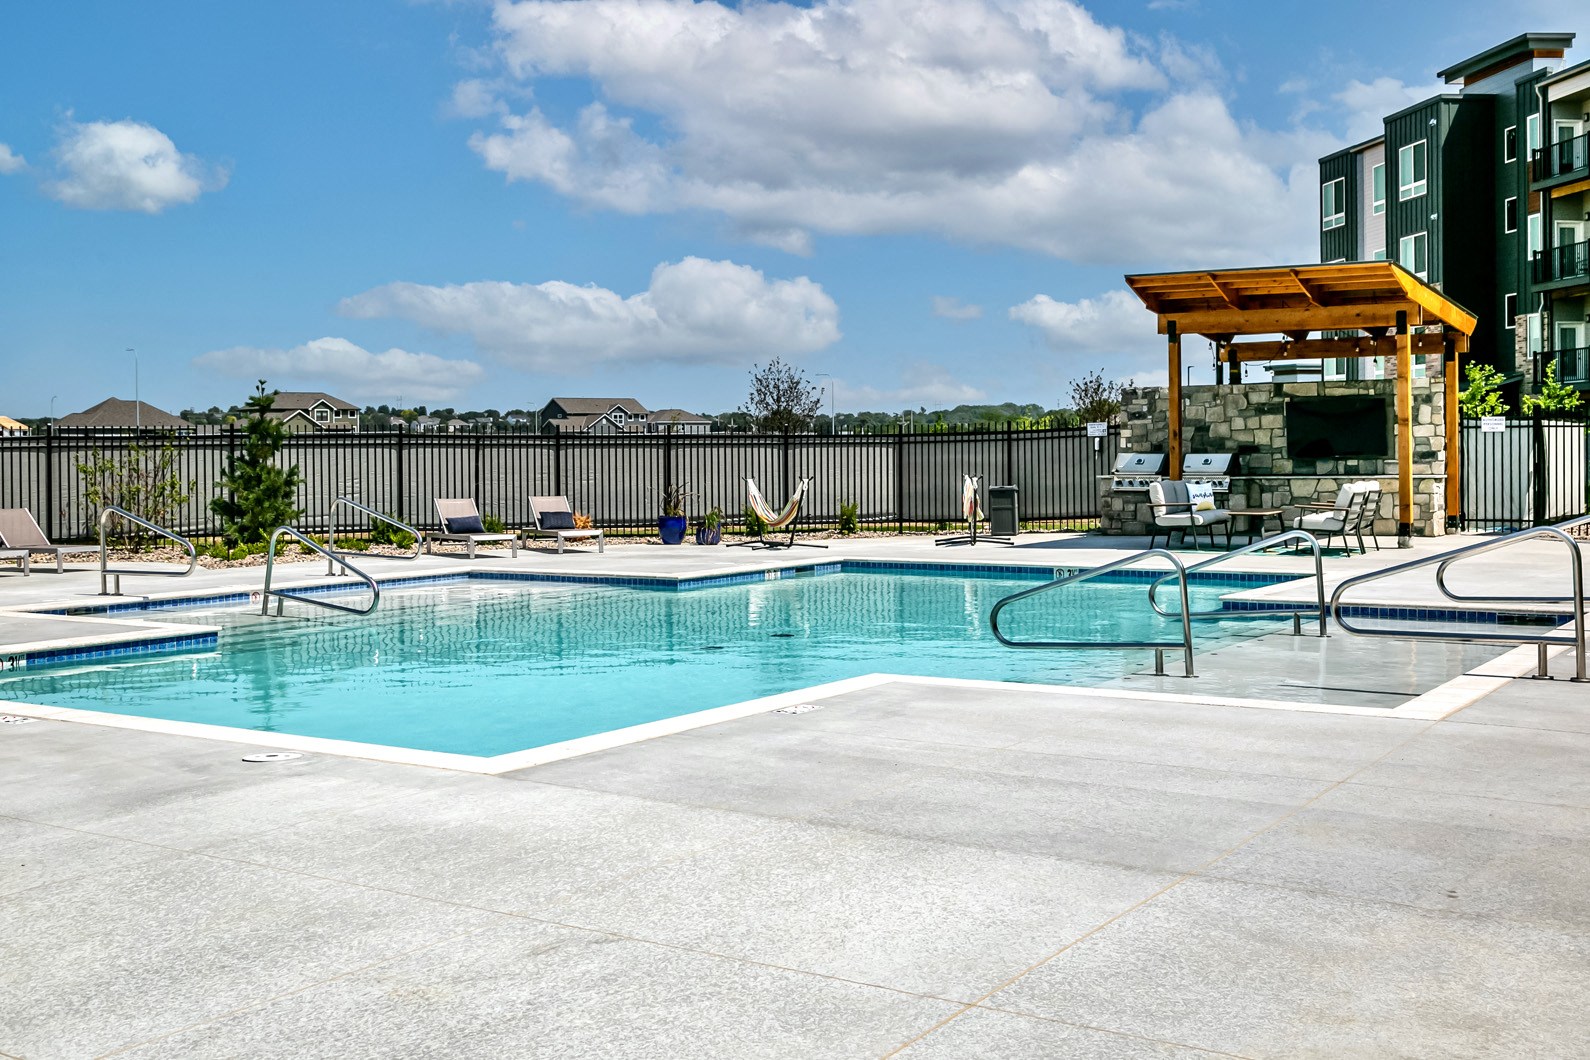 Resort-style pool at AXIS apartments in Papillion, NE